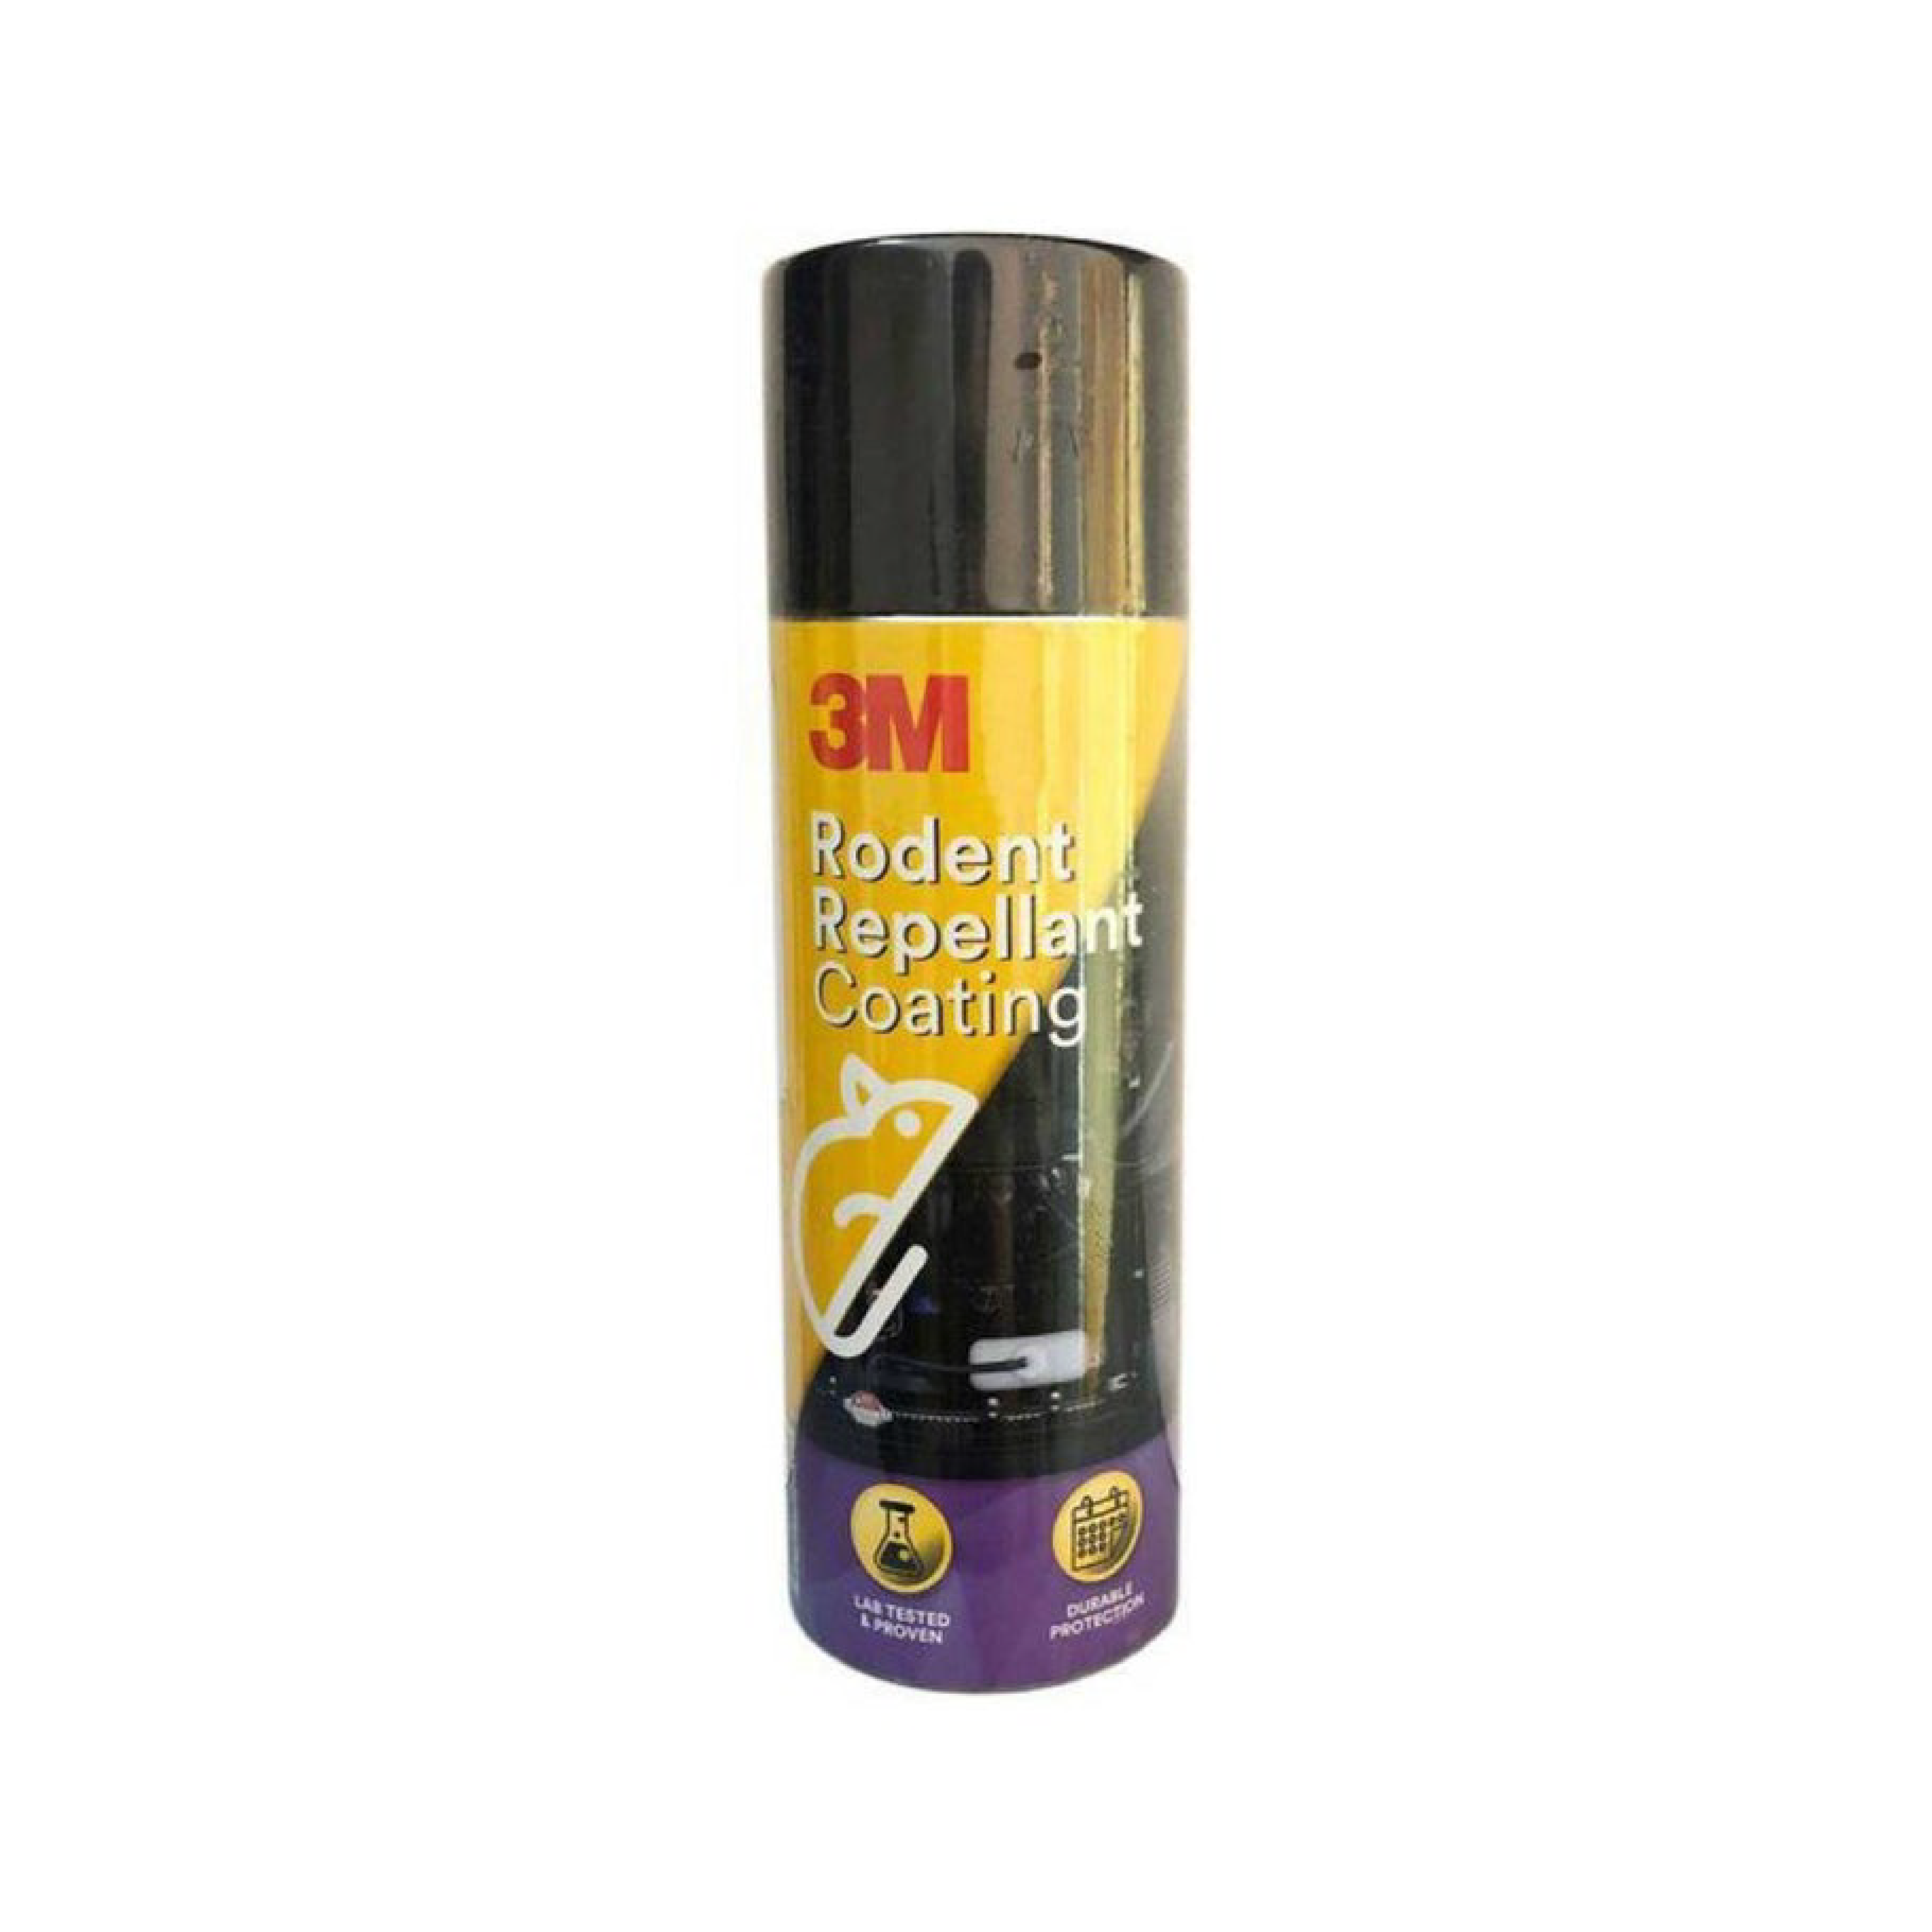 3M Rodent Repellent Coating, 250G